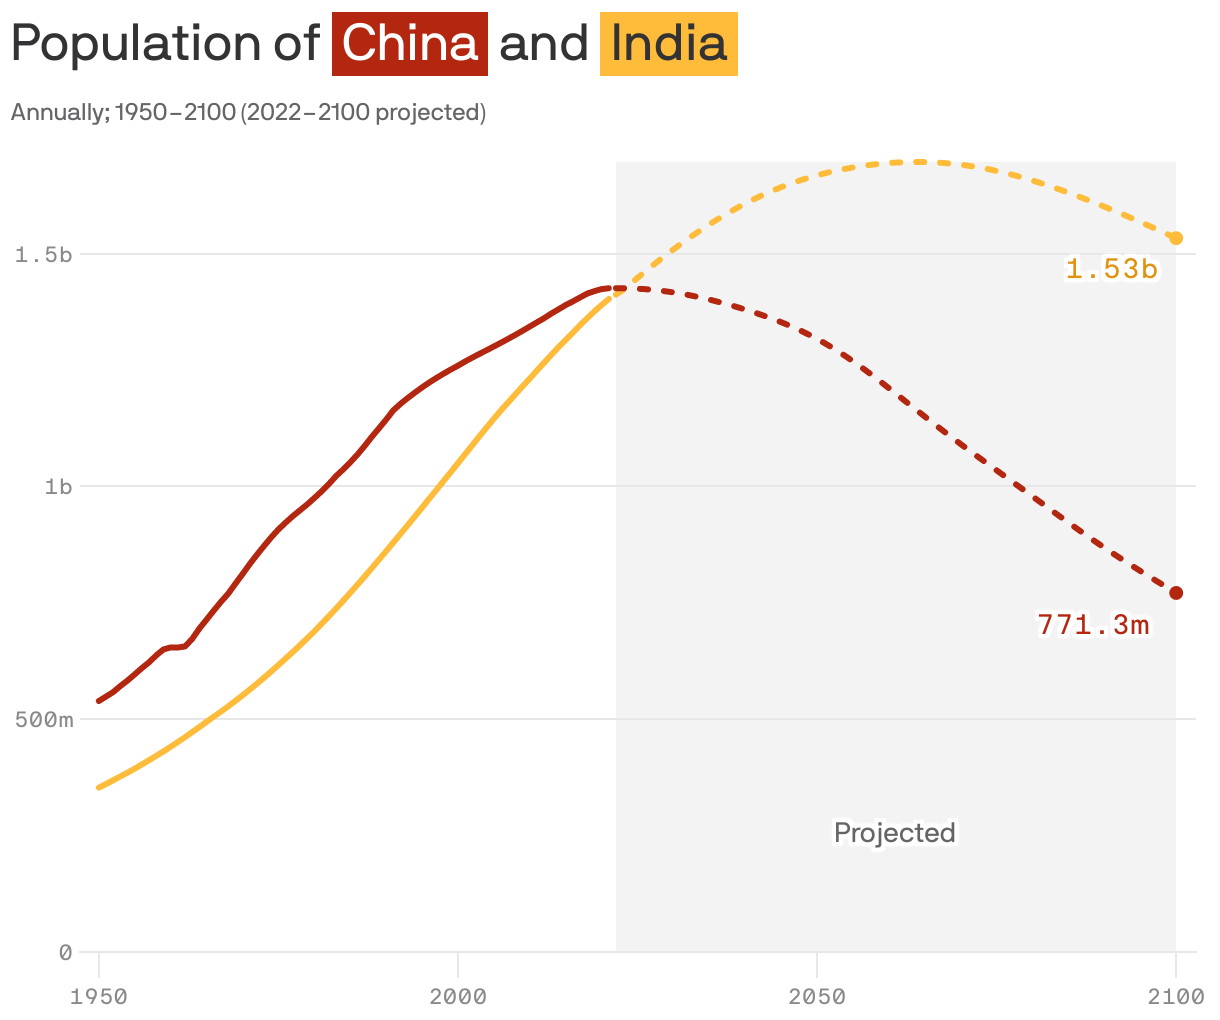 Population of <span style="background:#b32710; padding:3px 5px;color:white;">China</span> and <span style="background:#ffbc3b; padding:3px 5px;color:#333335;">India</span>